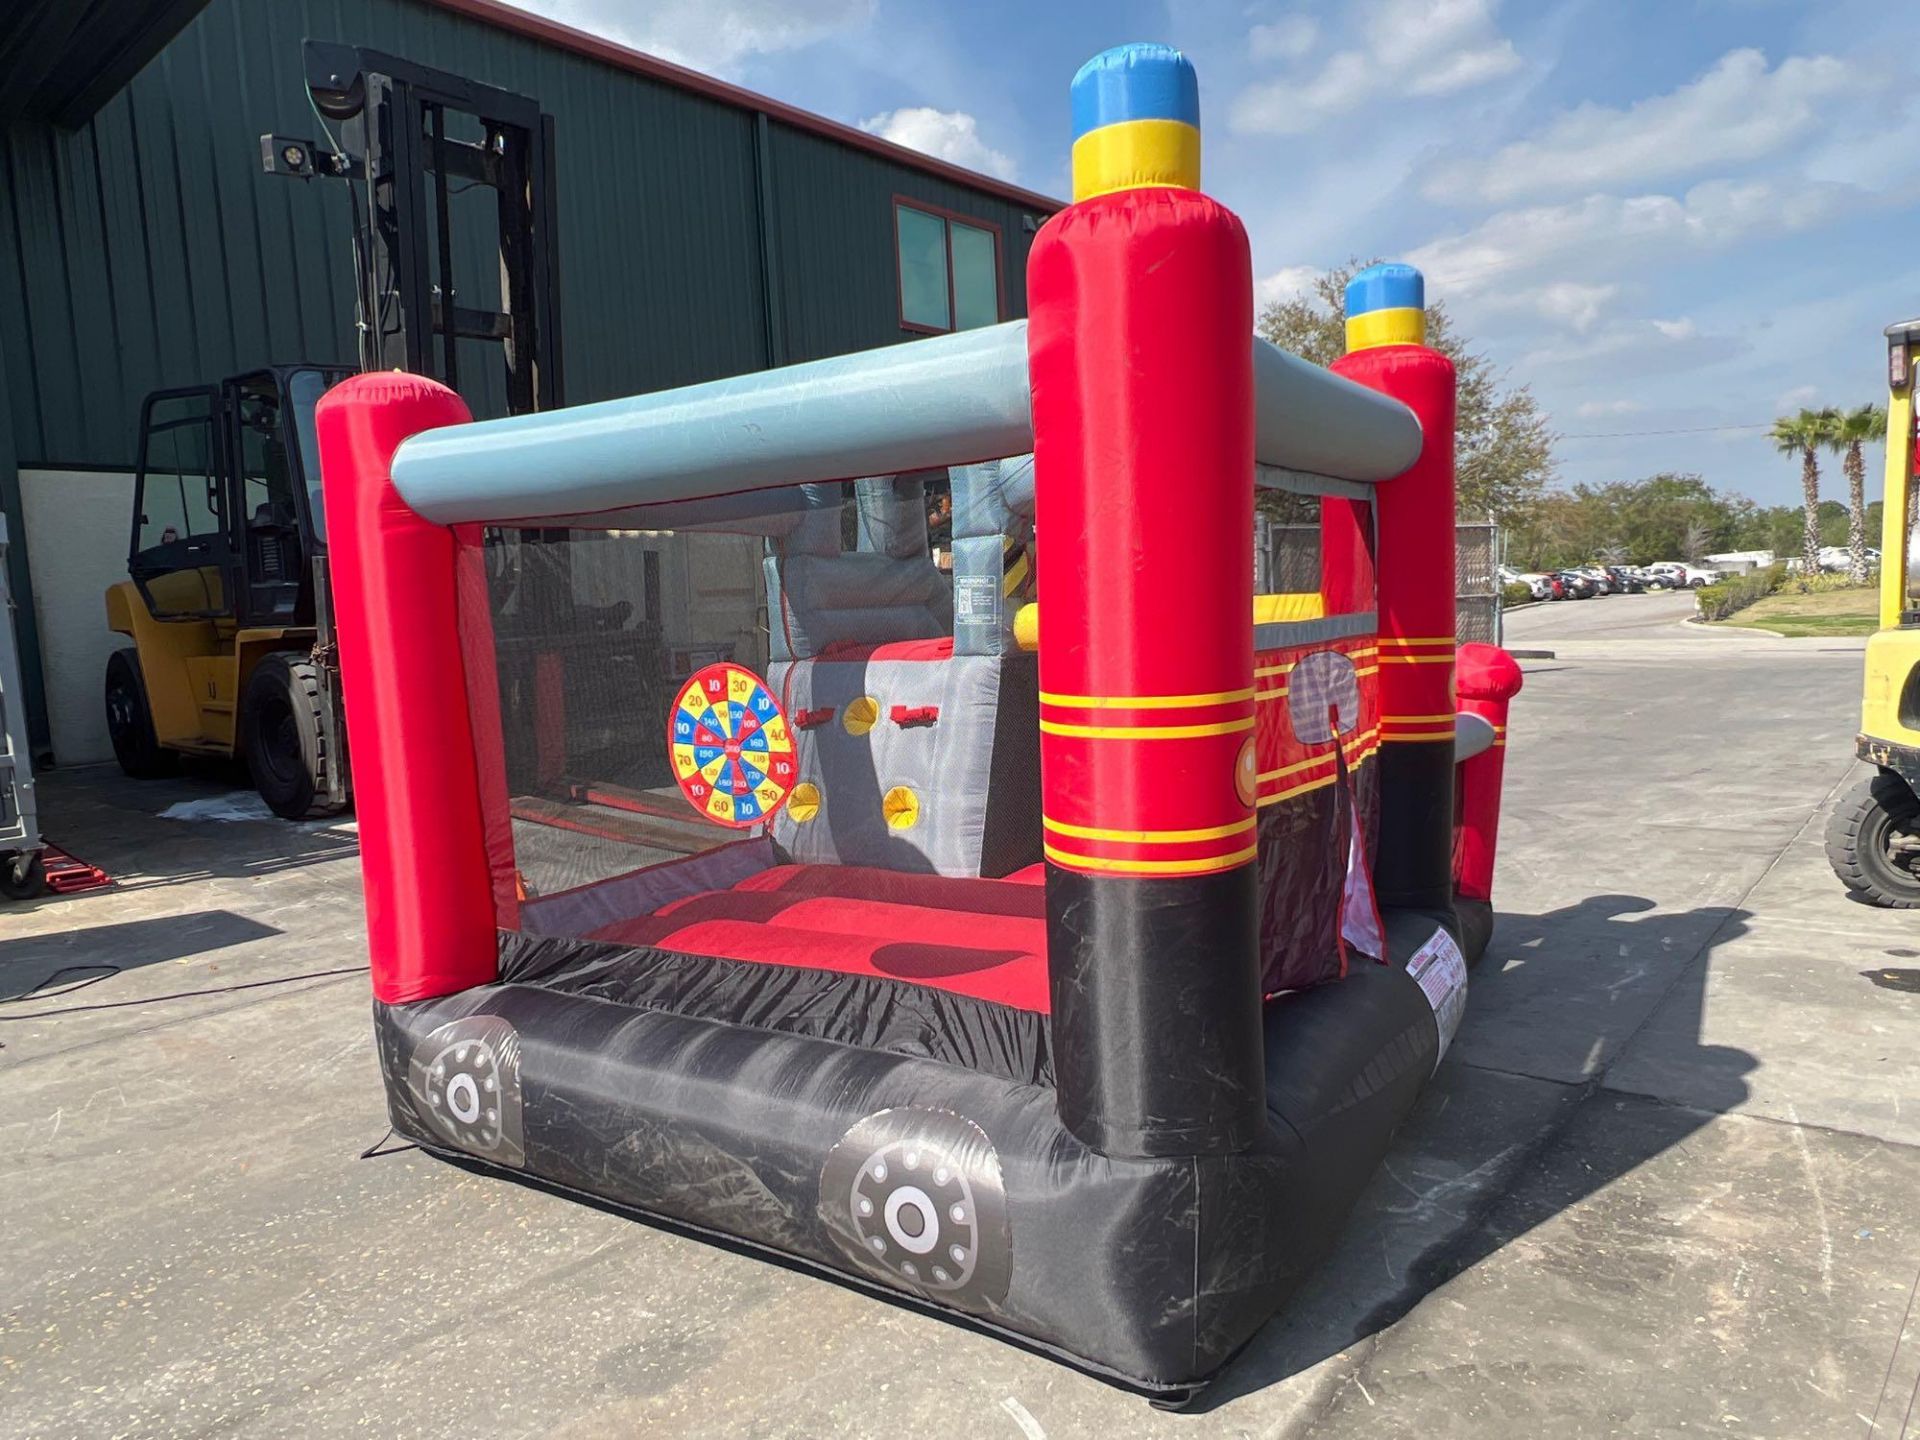 UNUSED BLOW-UP BOUNCY FIRE STATION PLAY YARD WITH SLIDE, VELCRO DARTS, BALLS, STAKES, & BLOWER - Image 8 of 12